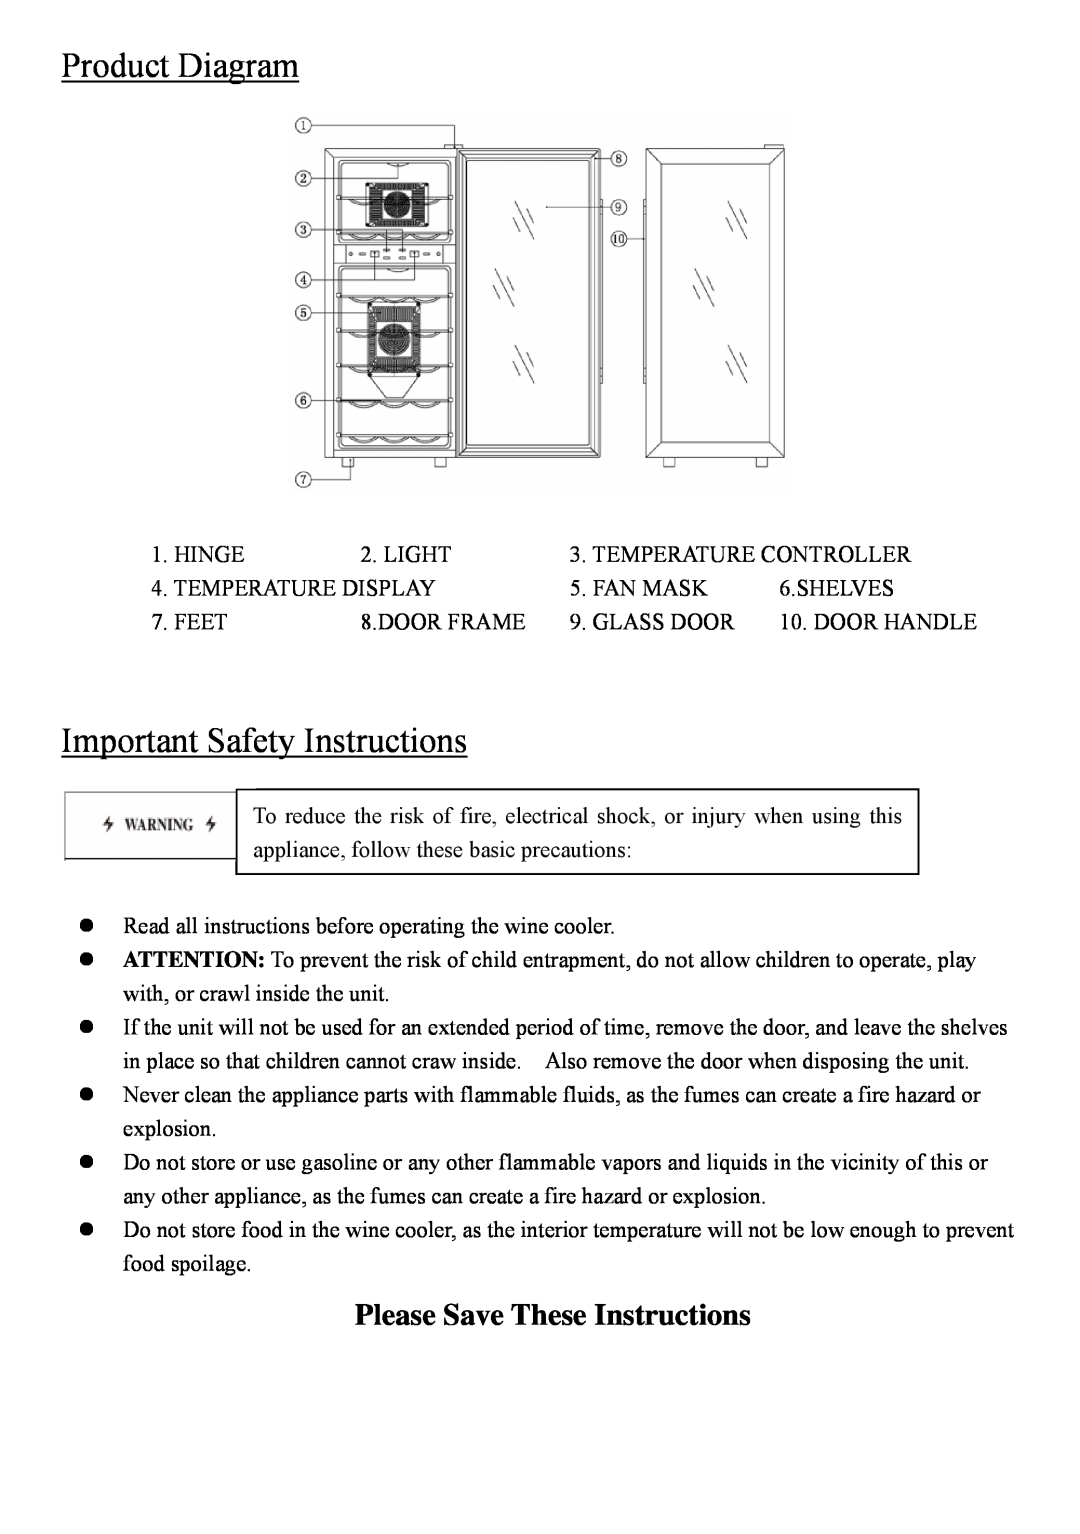 NewAir AW-211ED instruction manual Product Diagram, Important Safety Instructions, Please Save These Instructions 